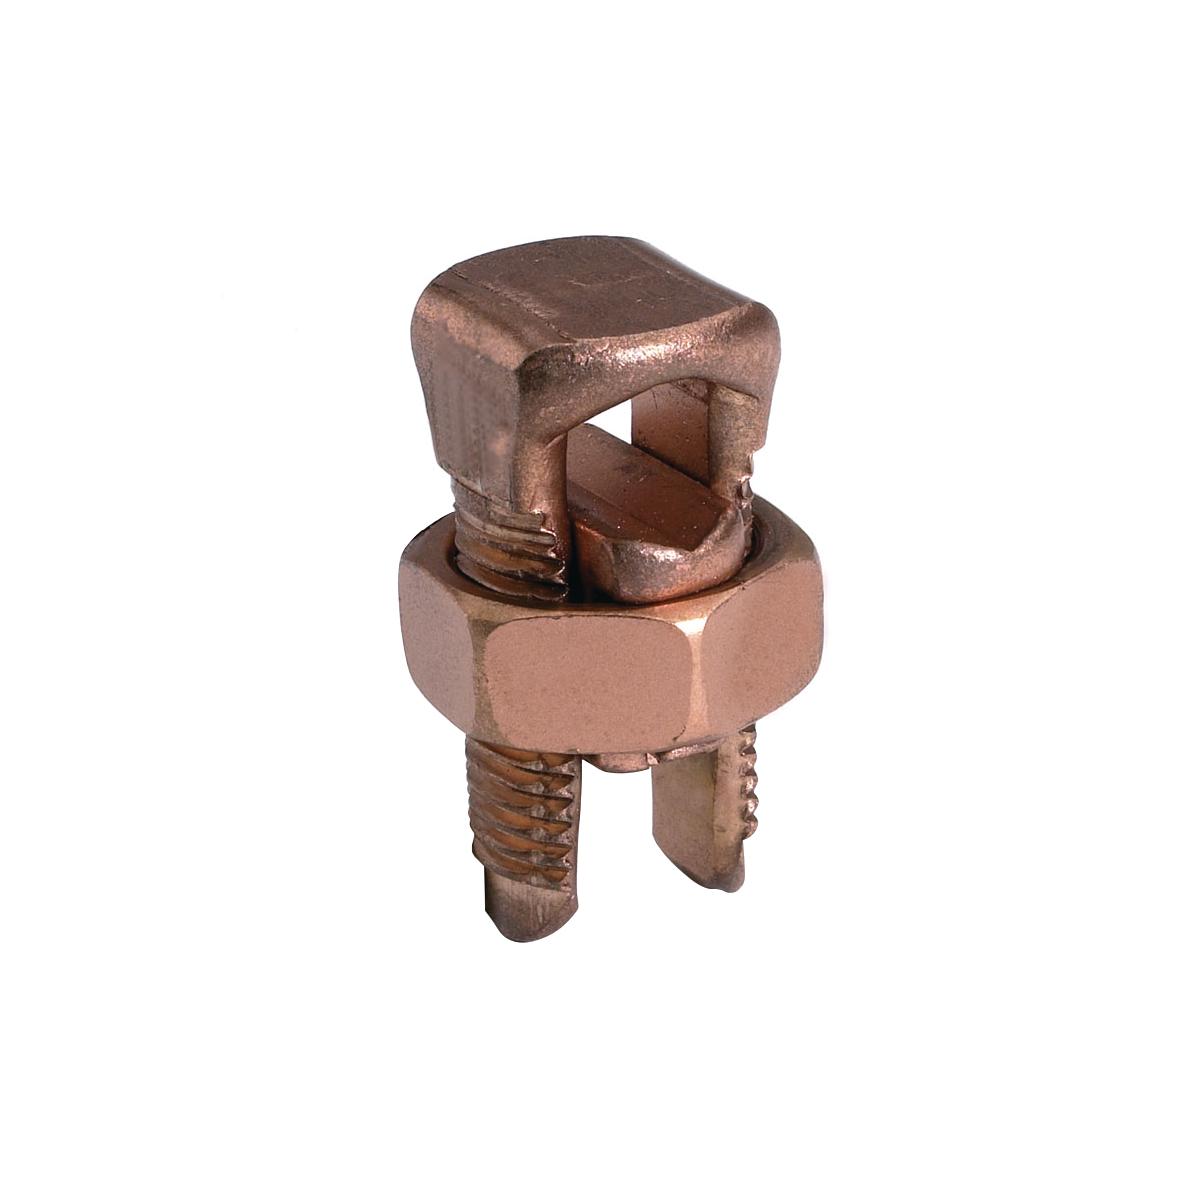 Hubbell KS173 Copper Split Bolt, Cu: 8 AWG (Str)-6 AWG (Sol) (Run & Tap).  ; Features: Compact, High Strength, High Copper Alloy SERVIT Split-Bolt Has Free-Running Threads And Easy To Grip Wrench Flats, Highly Resistant To Season Cracking And Corrosion, The SERVIT Prov